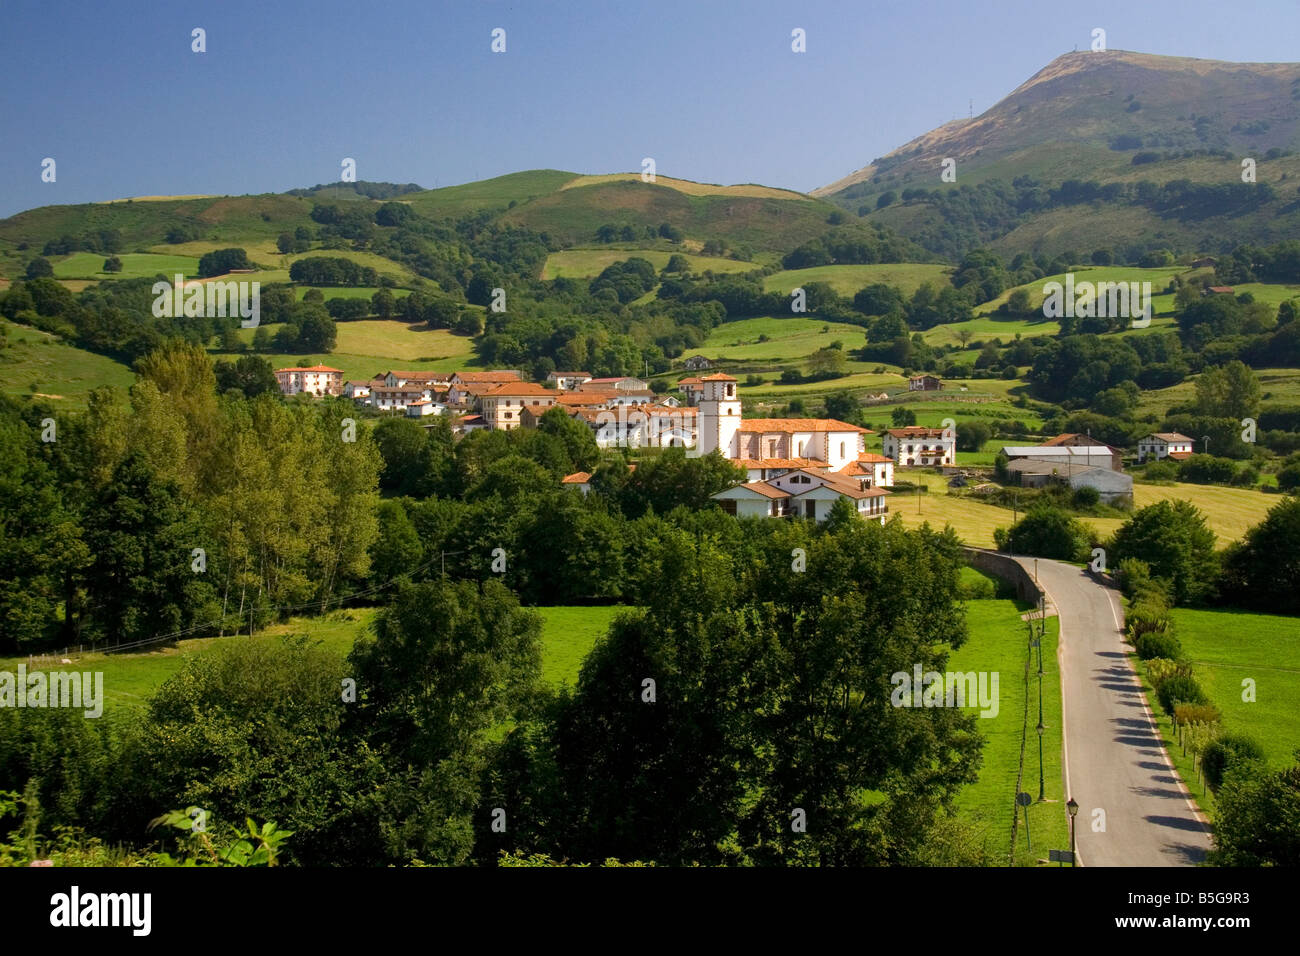 The village of Amaiur in the Baztan Valley of the Navarre region of northern Spain Stock Photo